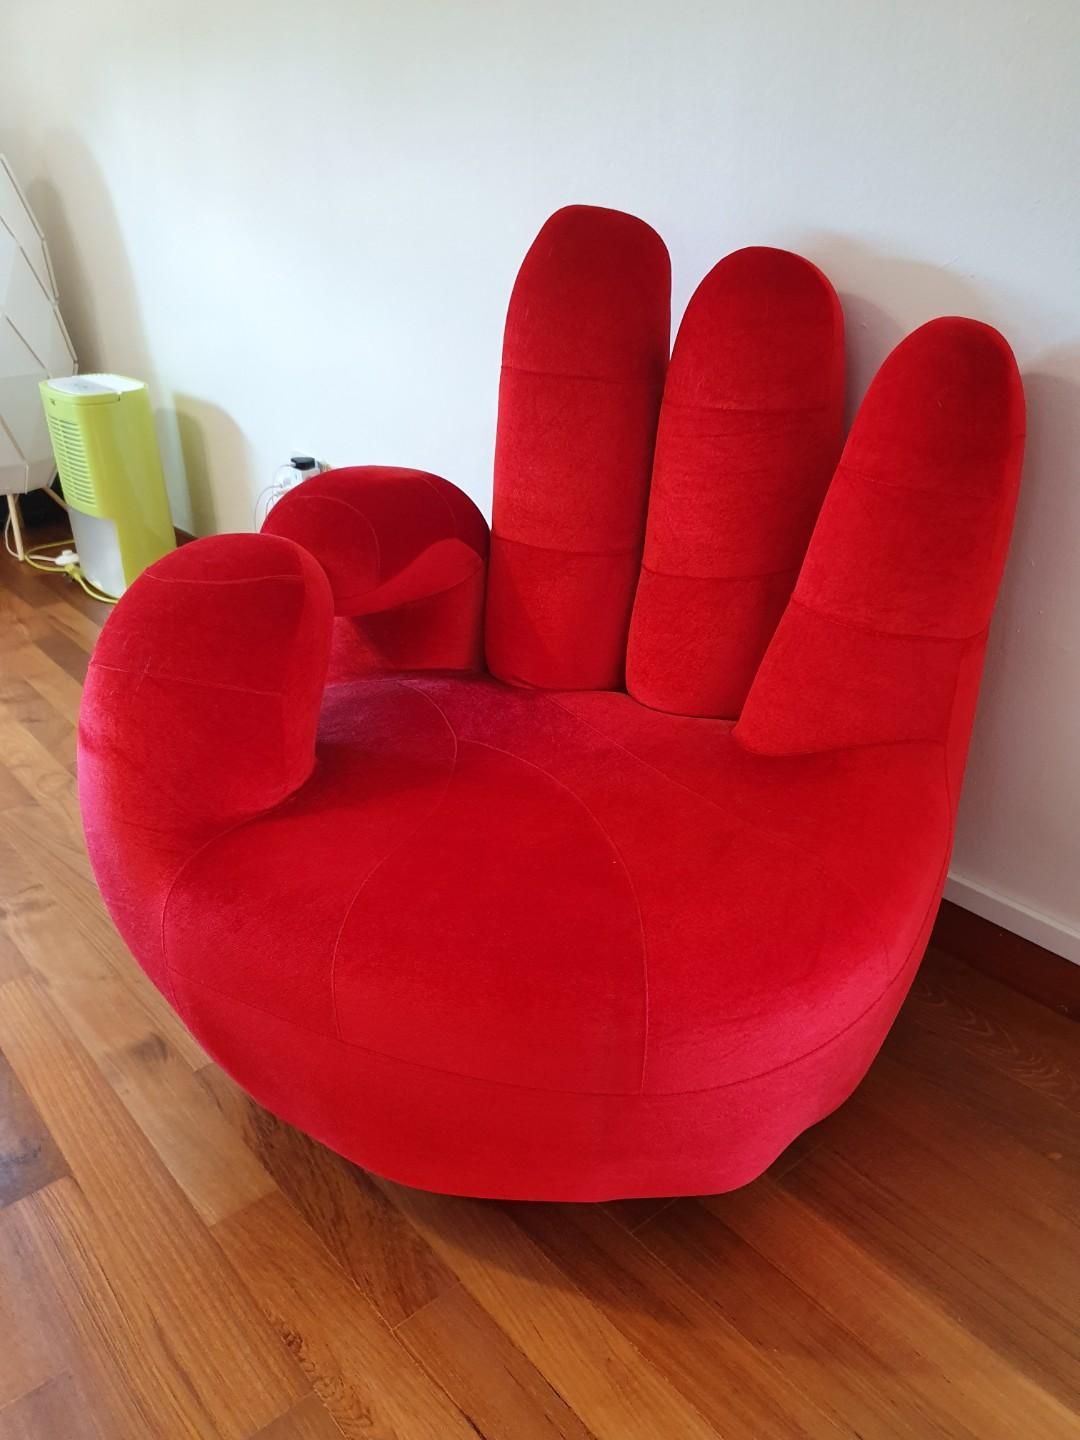 Urgent Moving Out Sales Ok Hand Sofa Furniture Sofas On Carousell